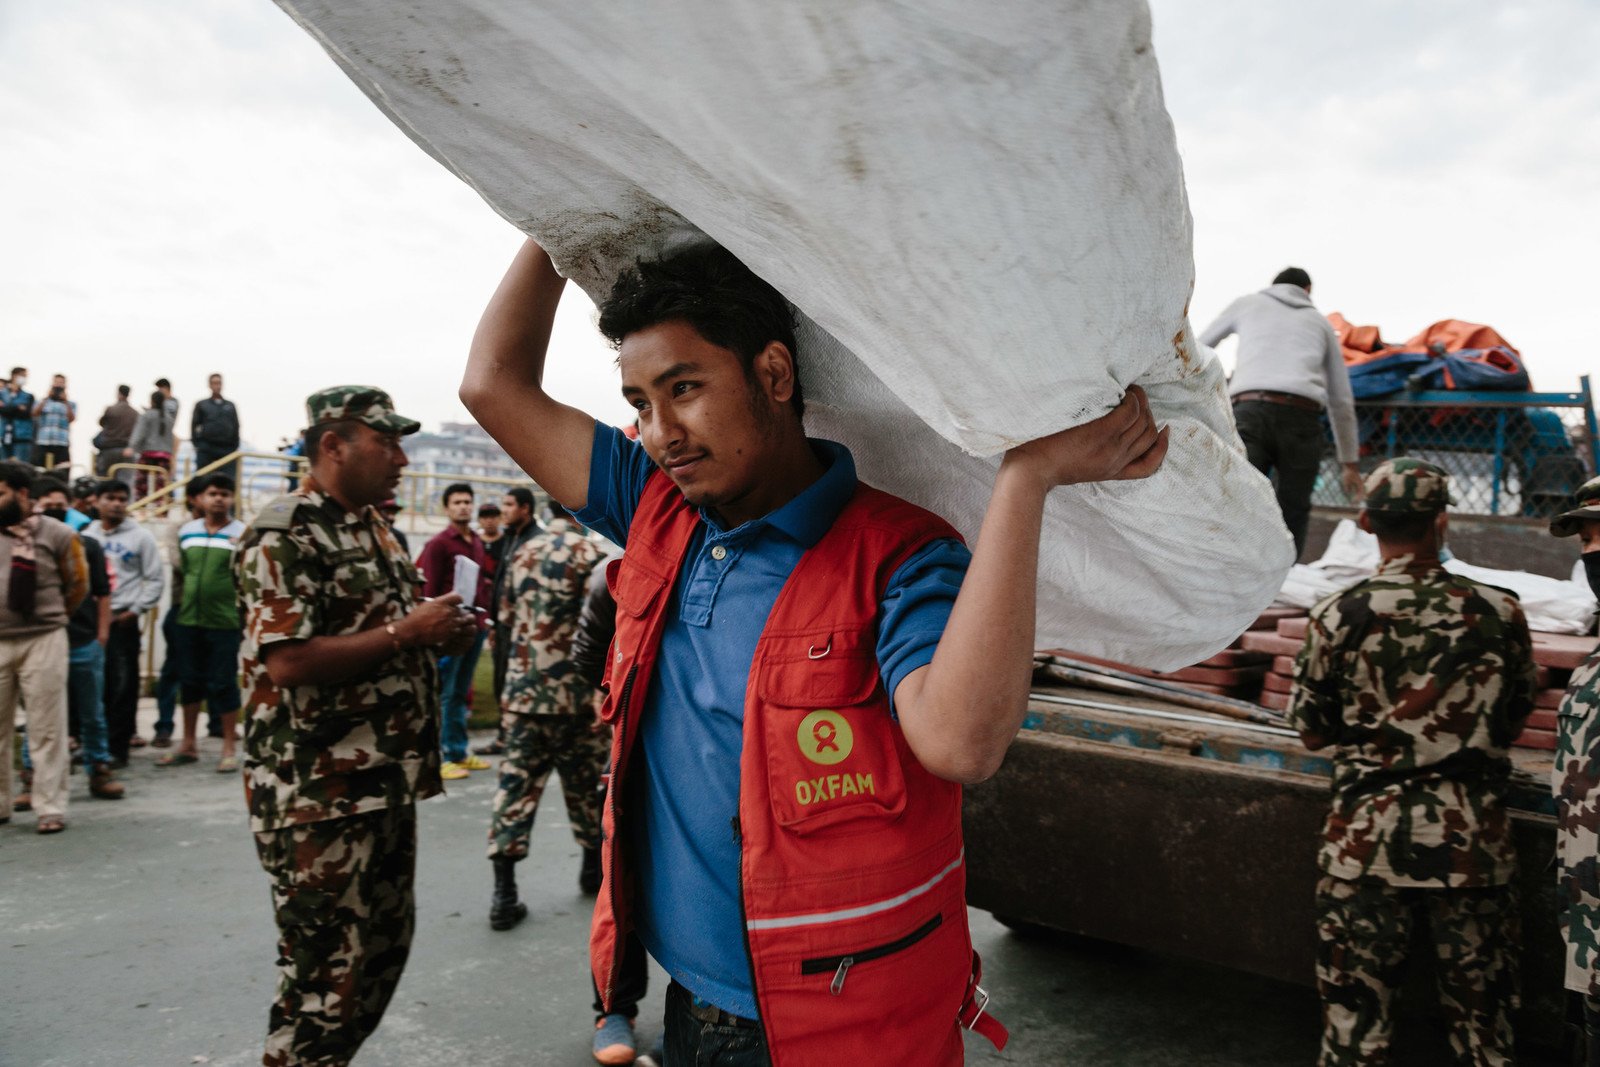 Having previously received training through Oxfam’s urban risk management programme, Shekhou Khadka (23) stayed in the Tundikhel camp after the earthquake to help with Oxfam’s relief work and serve his community. (Photo: Aubrey Wade / Oxfam)